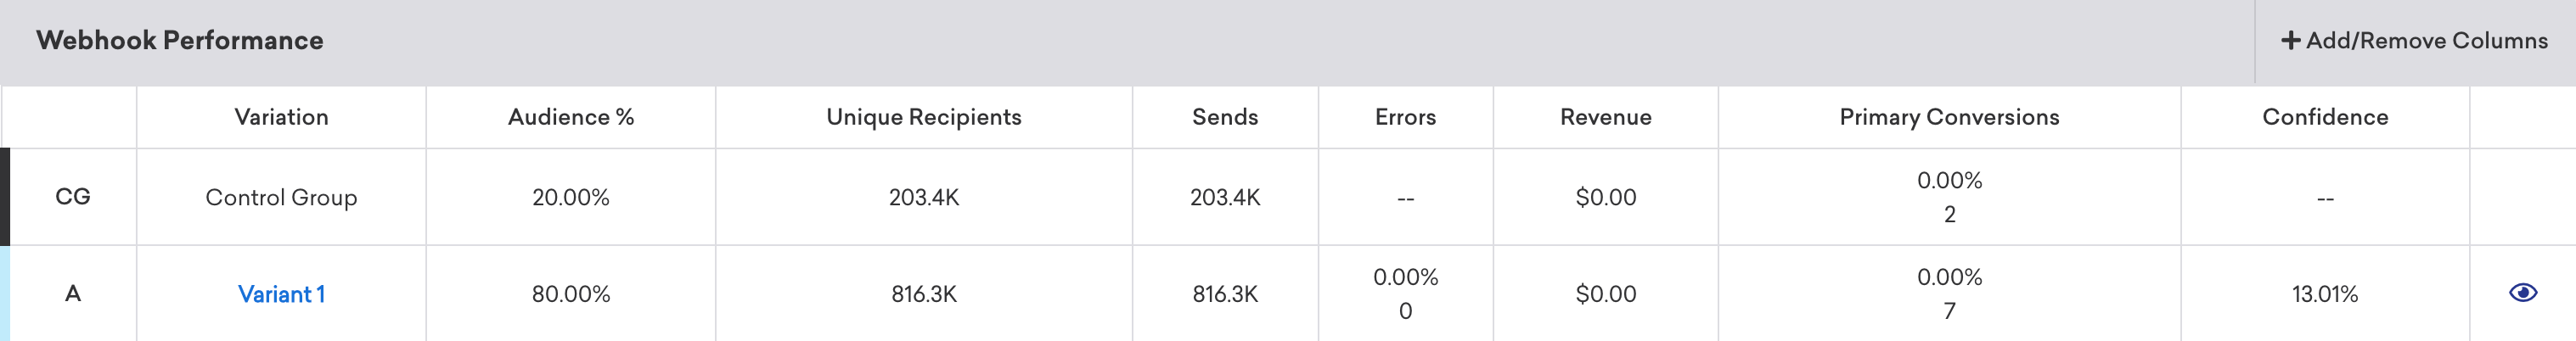 Webhook performance panel that includes a table of metrics for a control group and Variant 1.